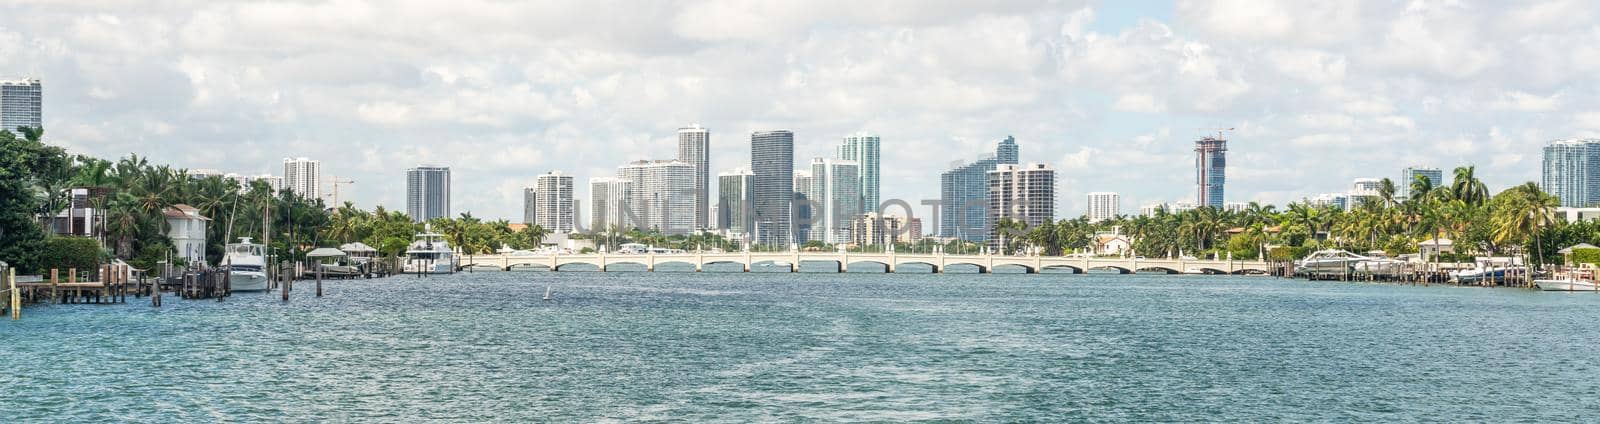 Miami skyline with skyscrapers and bridge over sea by Mariakray